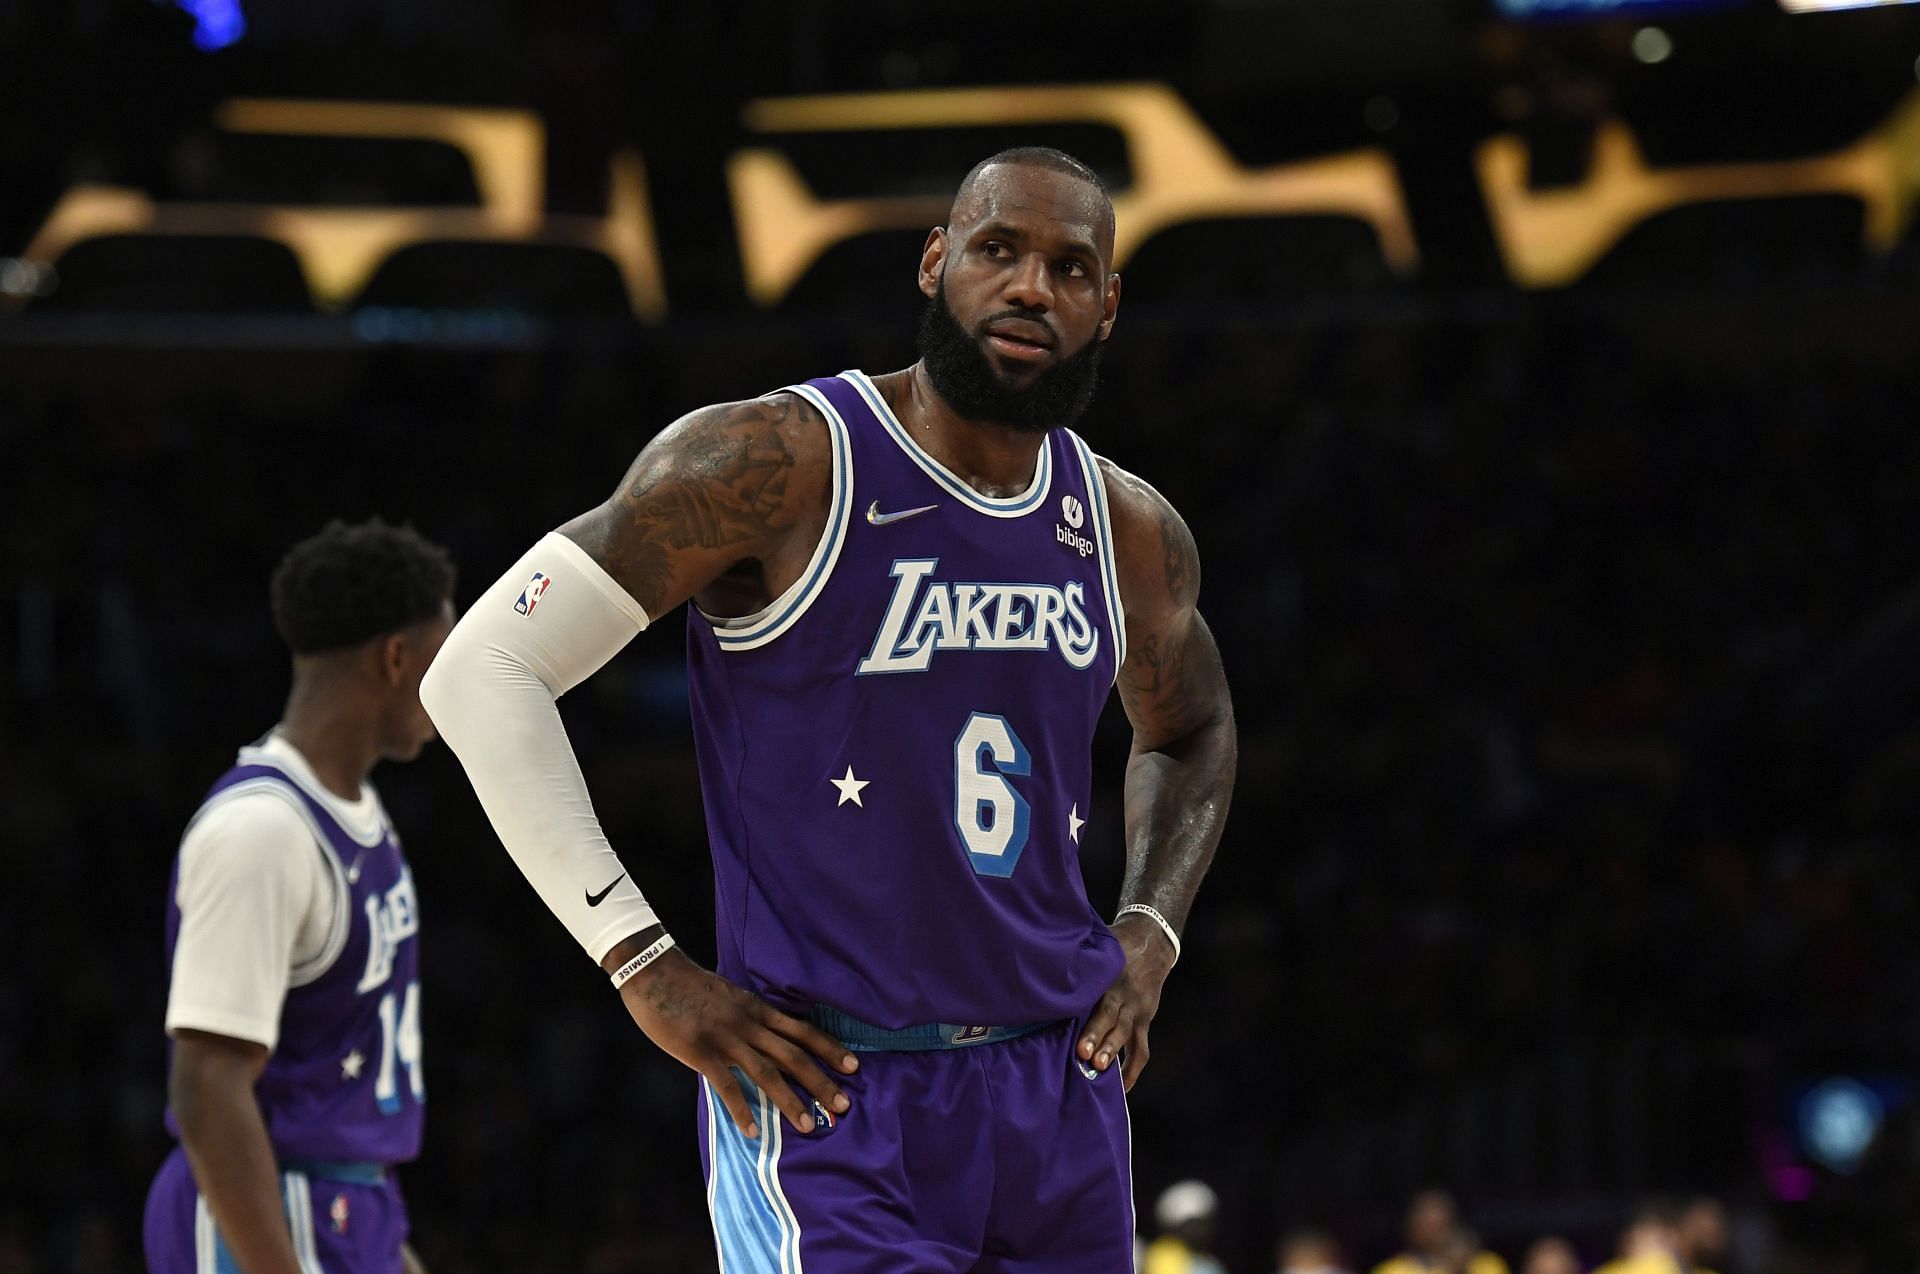 LeBron James will be hoping to bounce back strong for the LA Lakers next season.